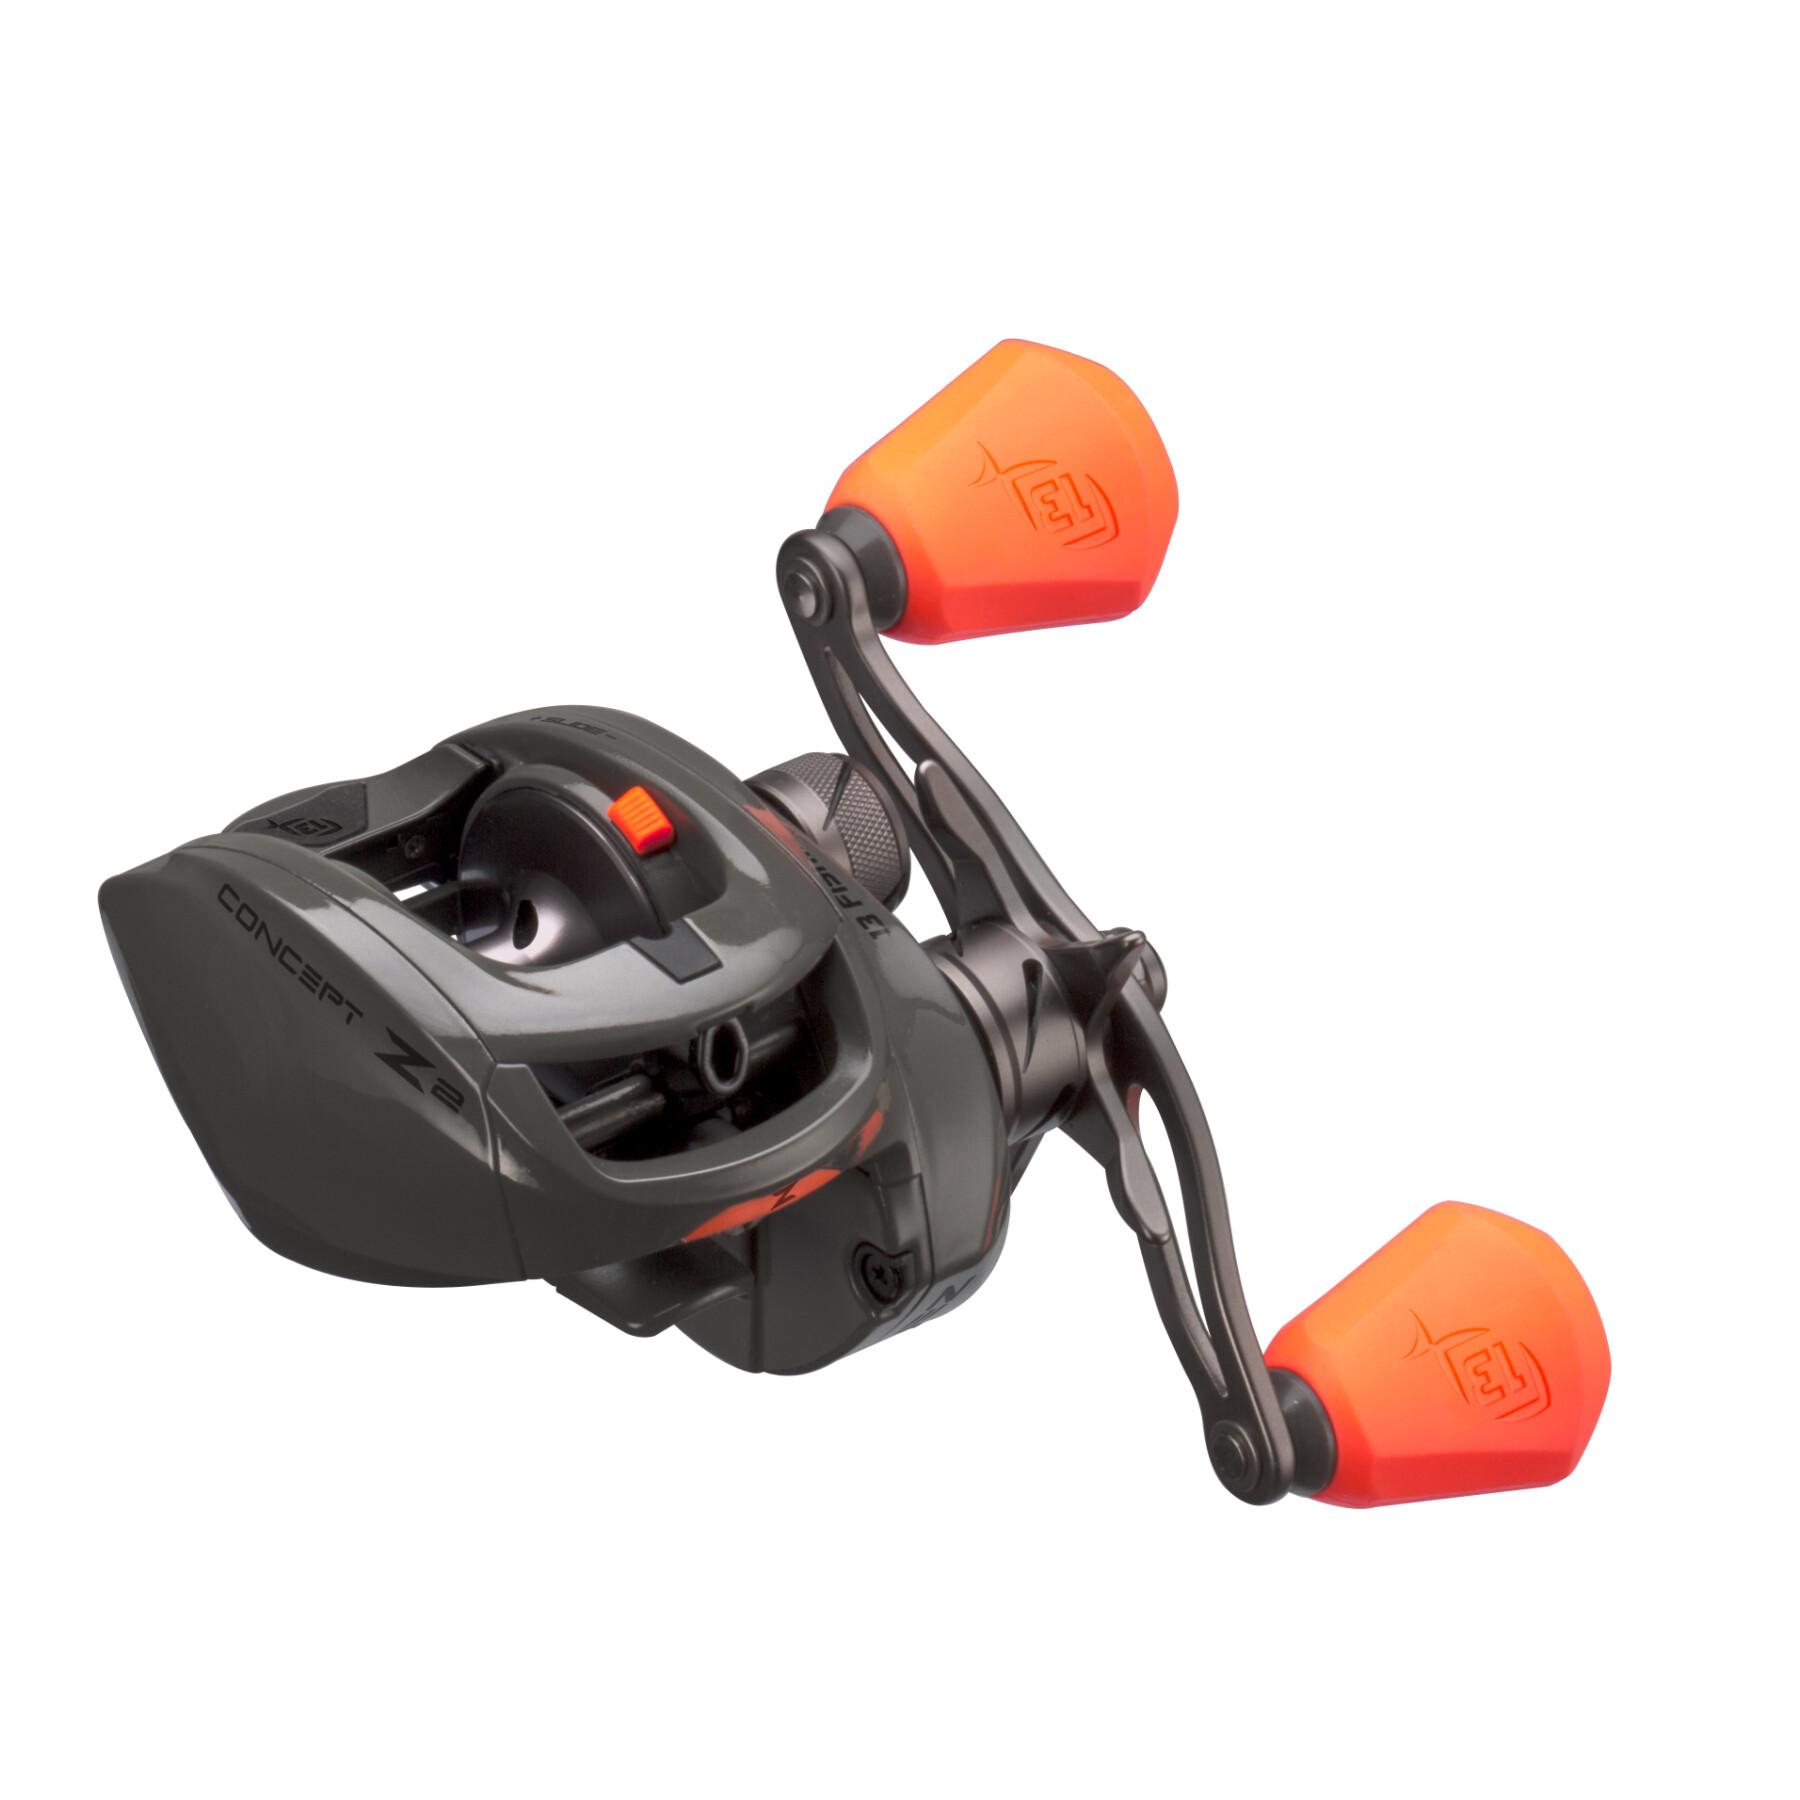 Rolle 13 Fishing Concept Z sld 6.8:1 lh